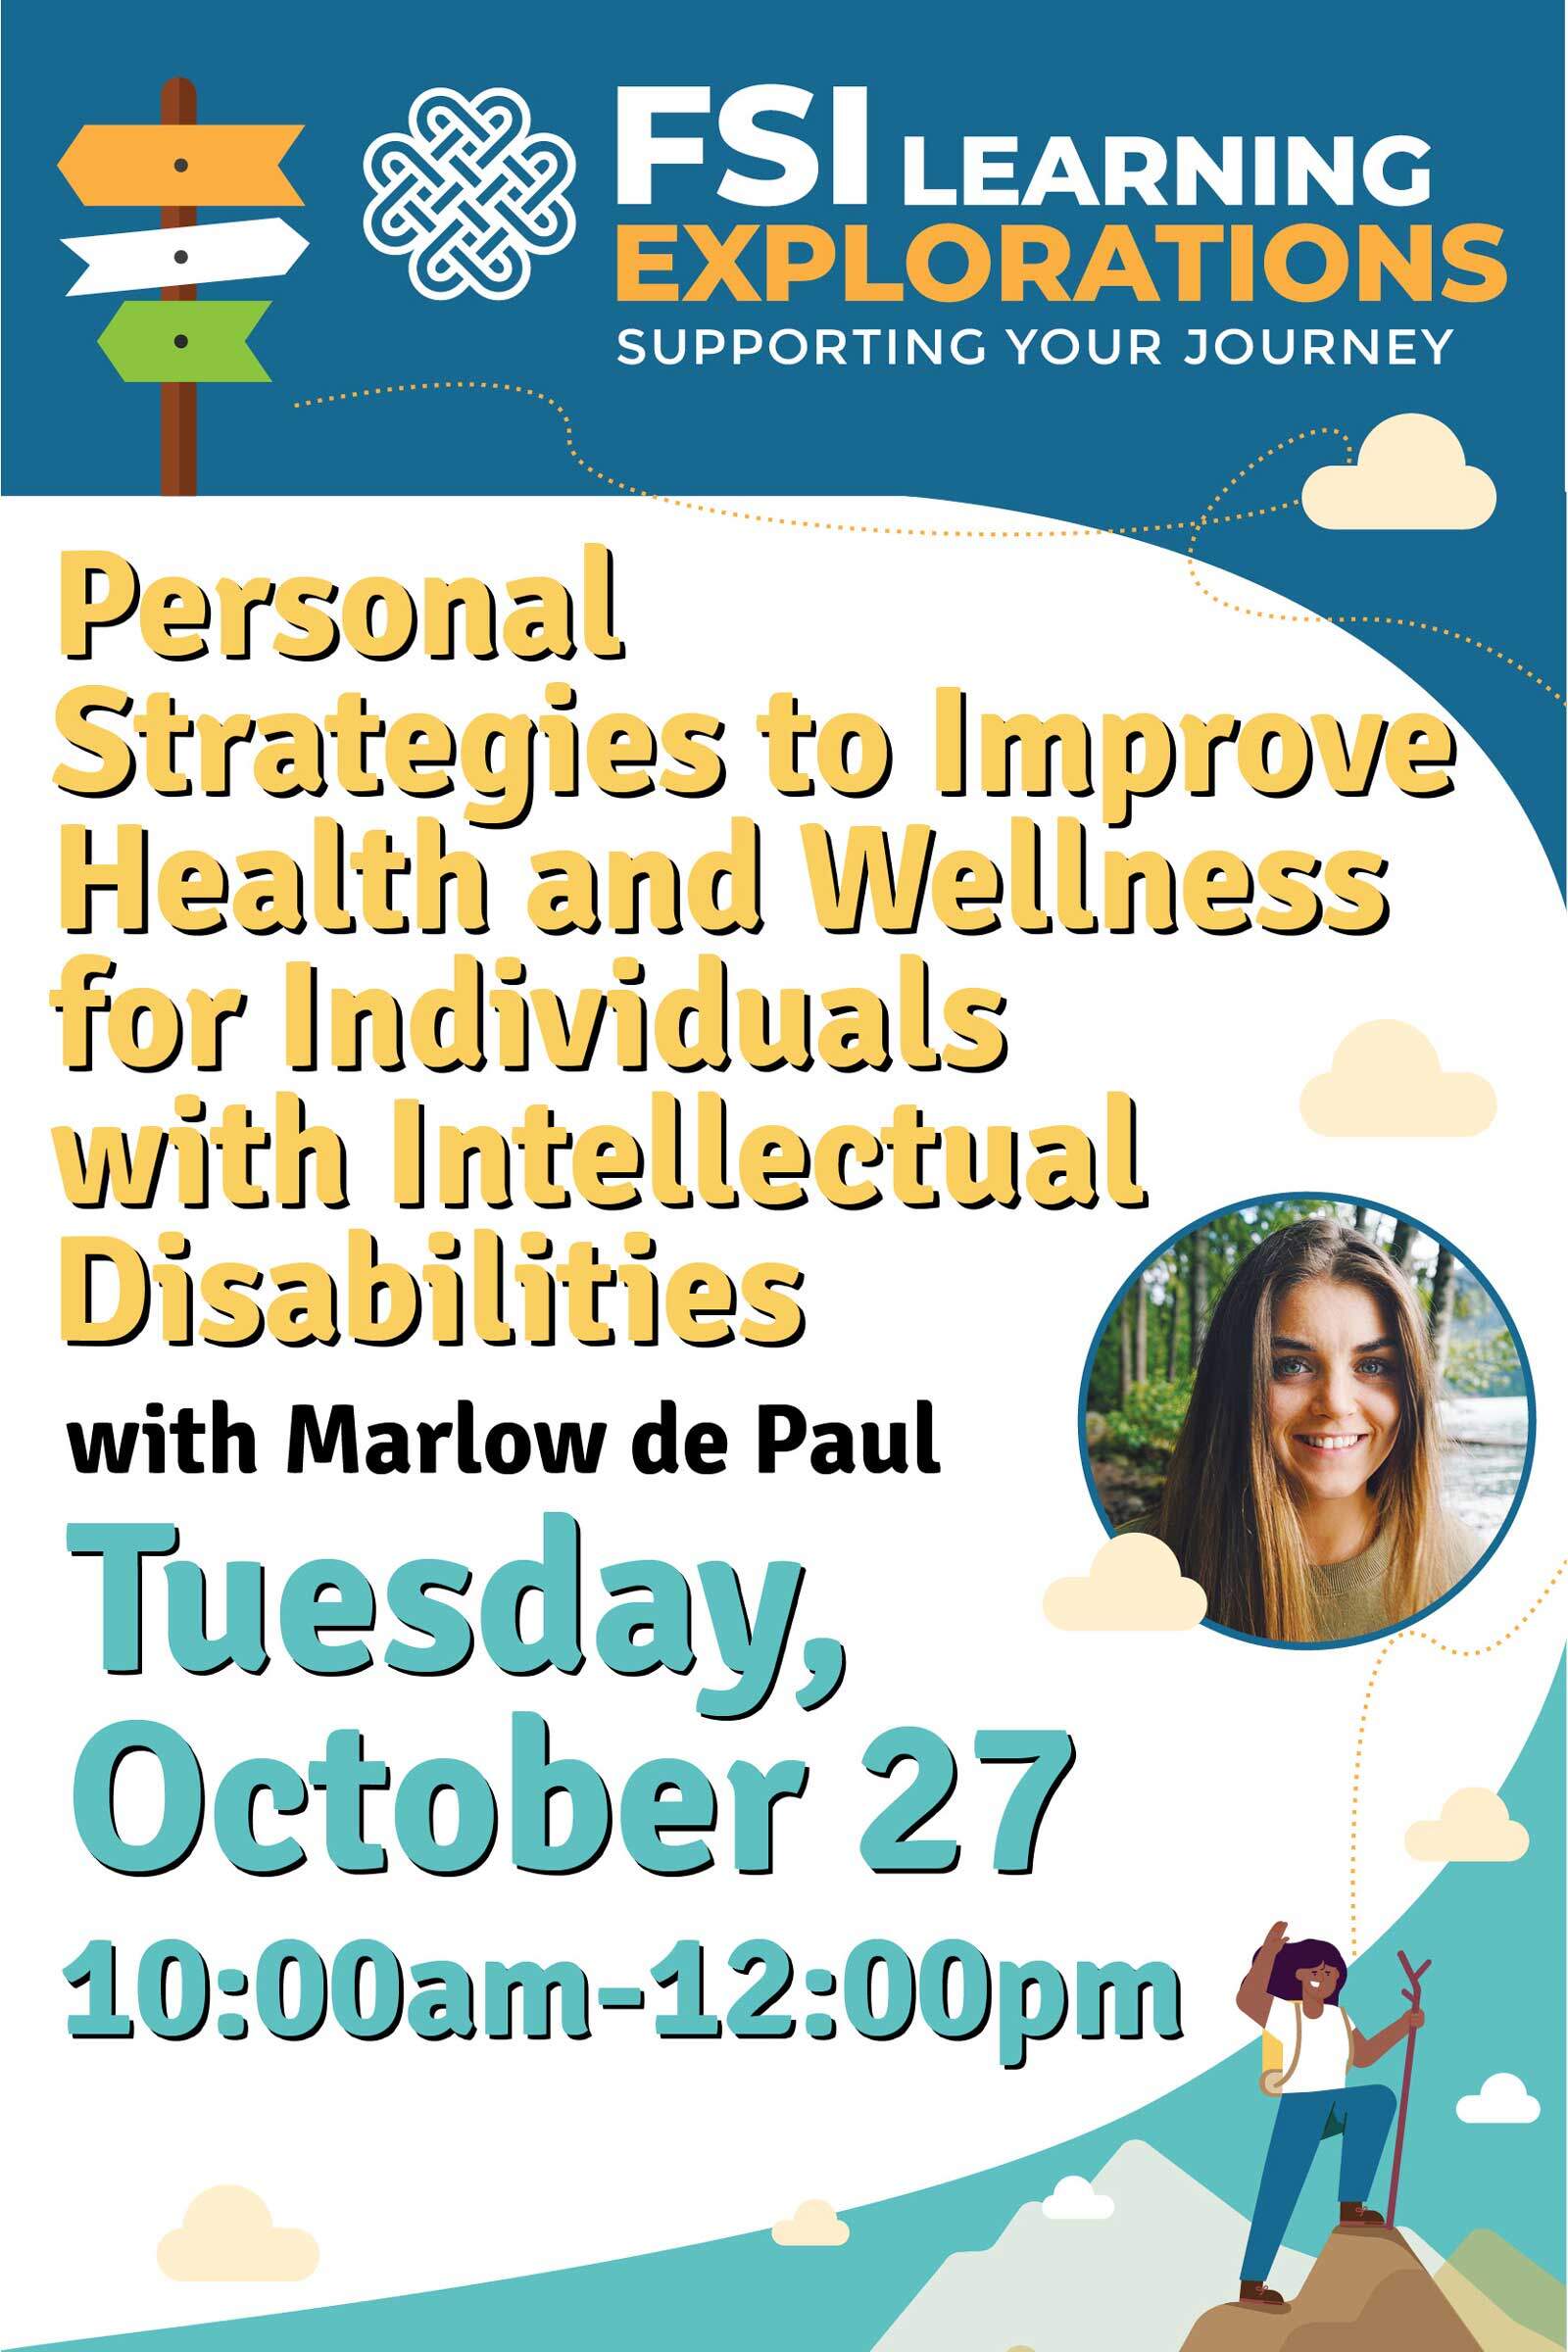 FSI Learning Explorations -Personal Strategies to Improve Health and Wellness for Individuals with Intellectual Disabilities